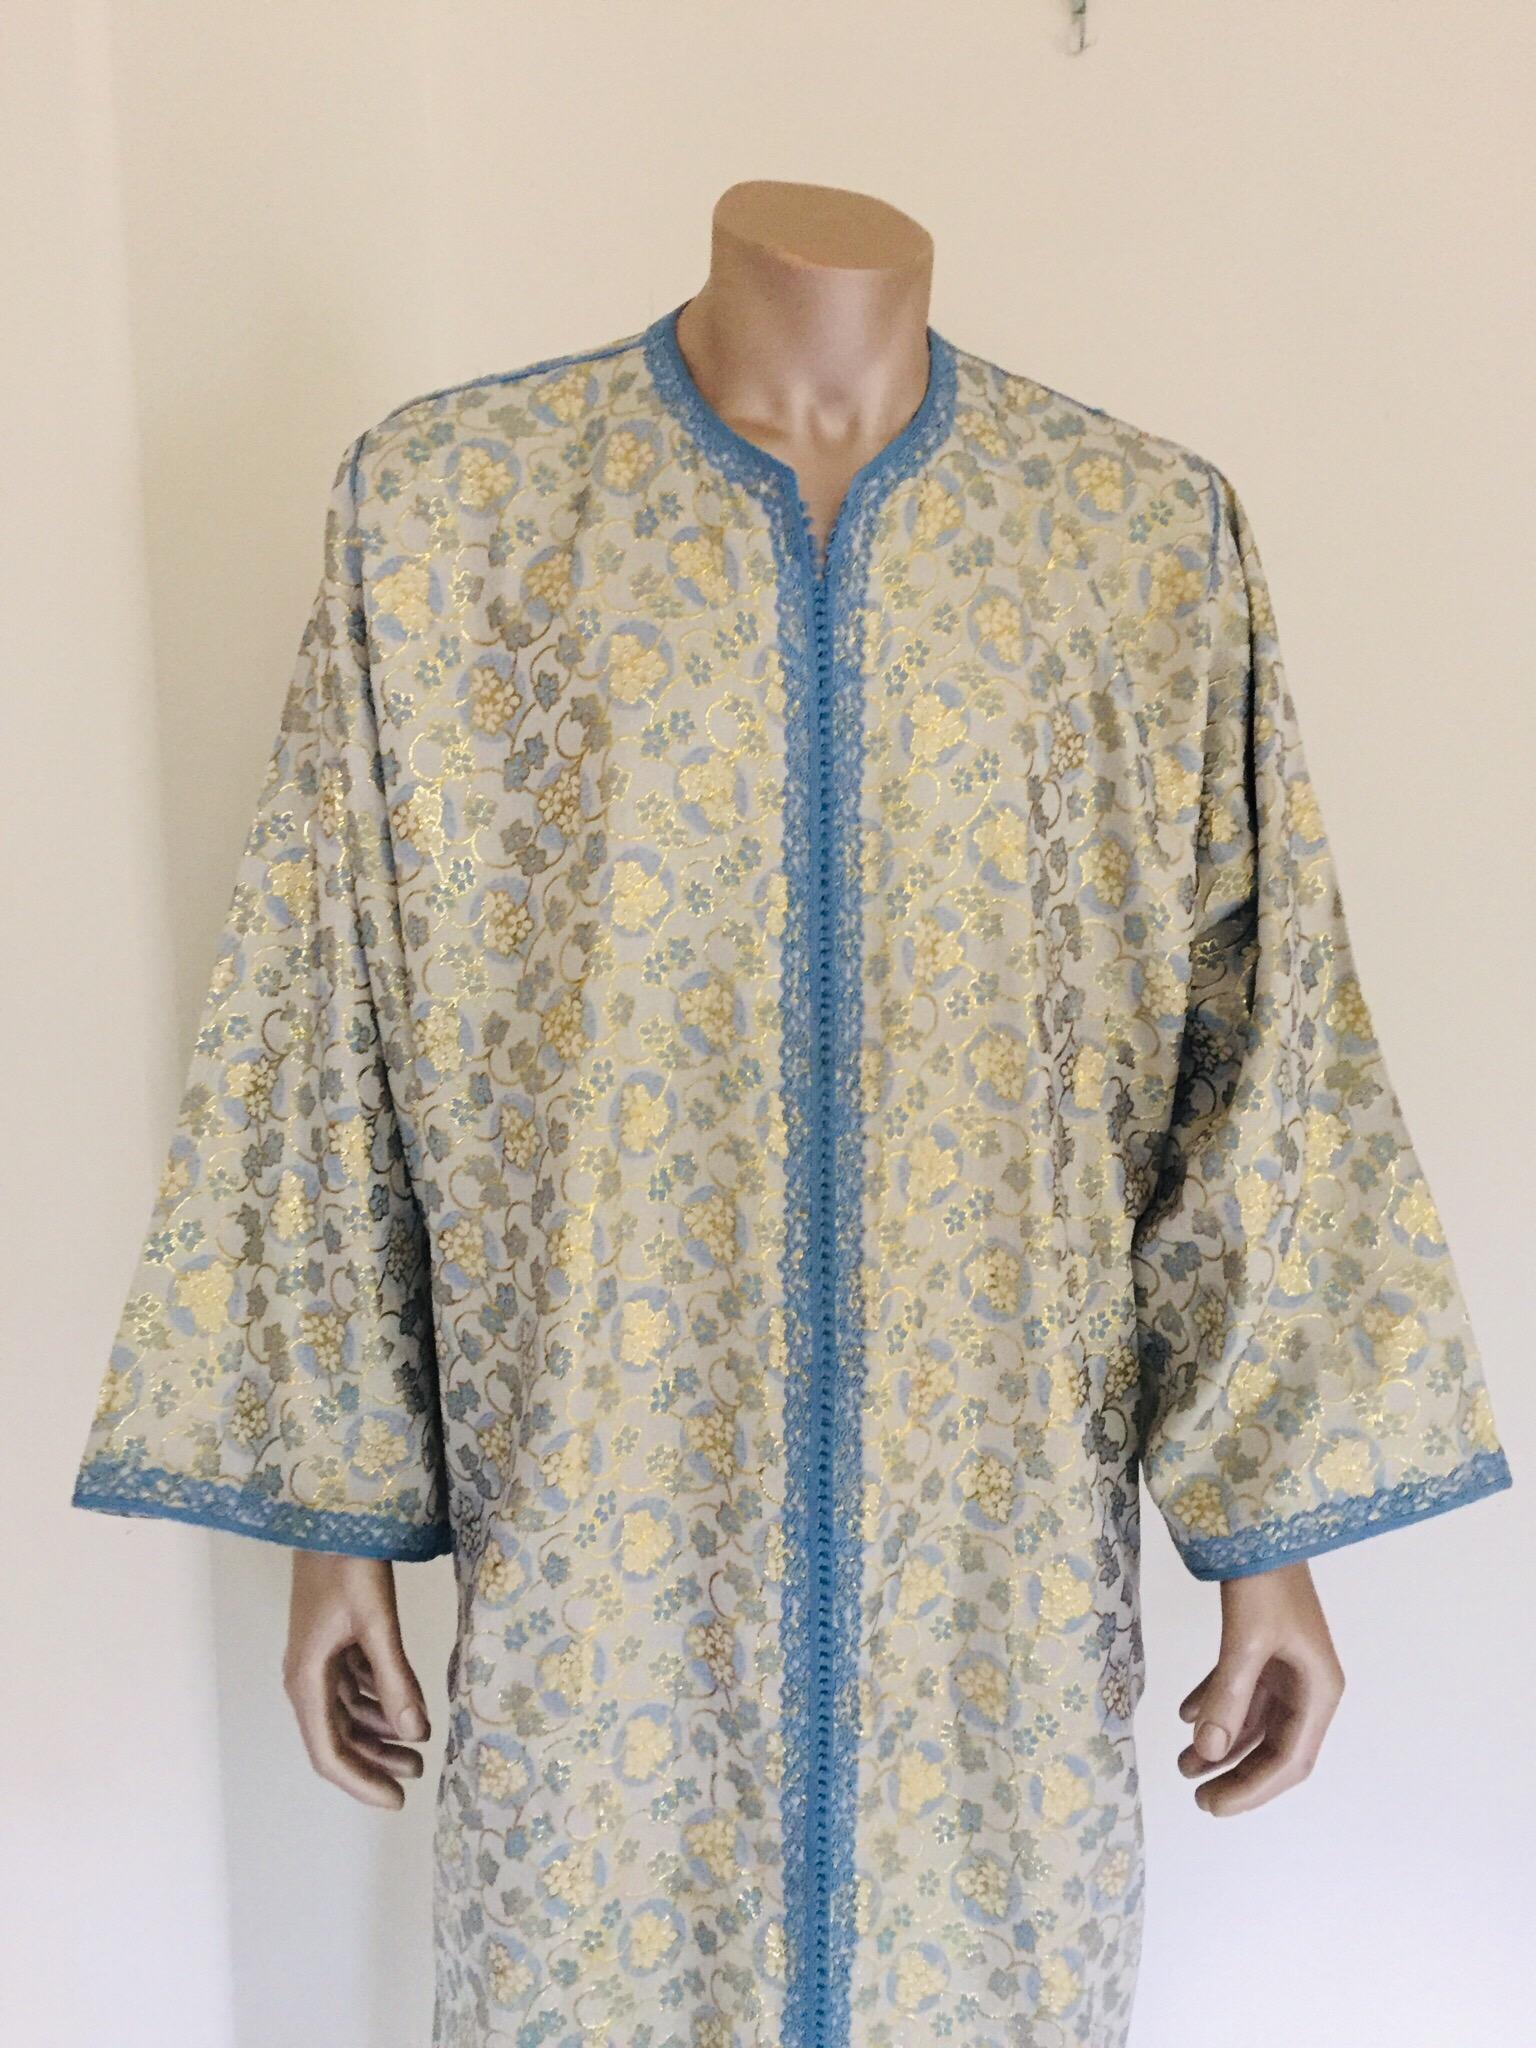 Moroccan Metallic Blue and Silver Brocade 1970s Maxi Dress Caftan, Evening Gown Kaftan For Sale